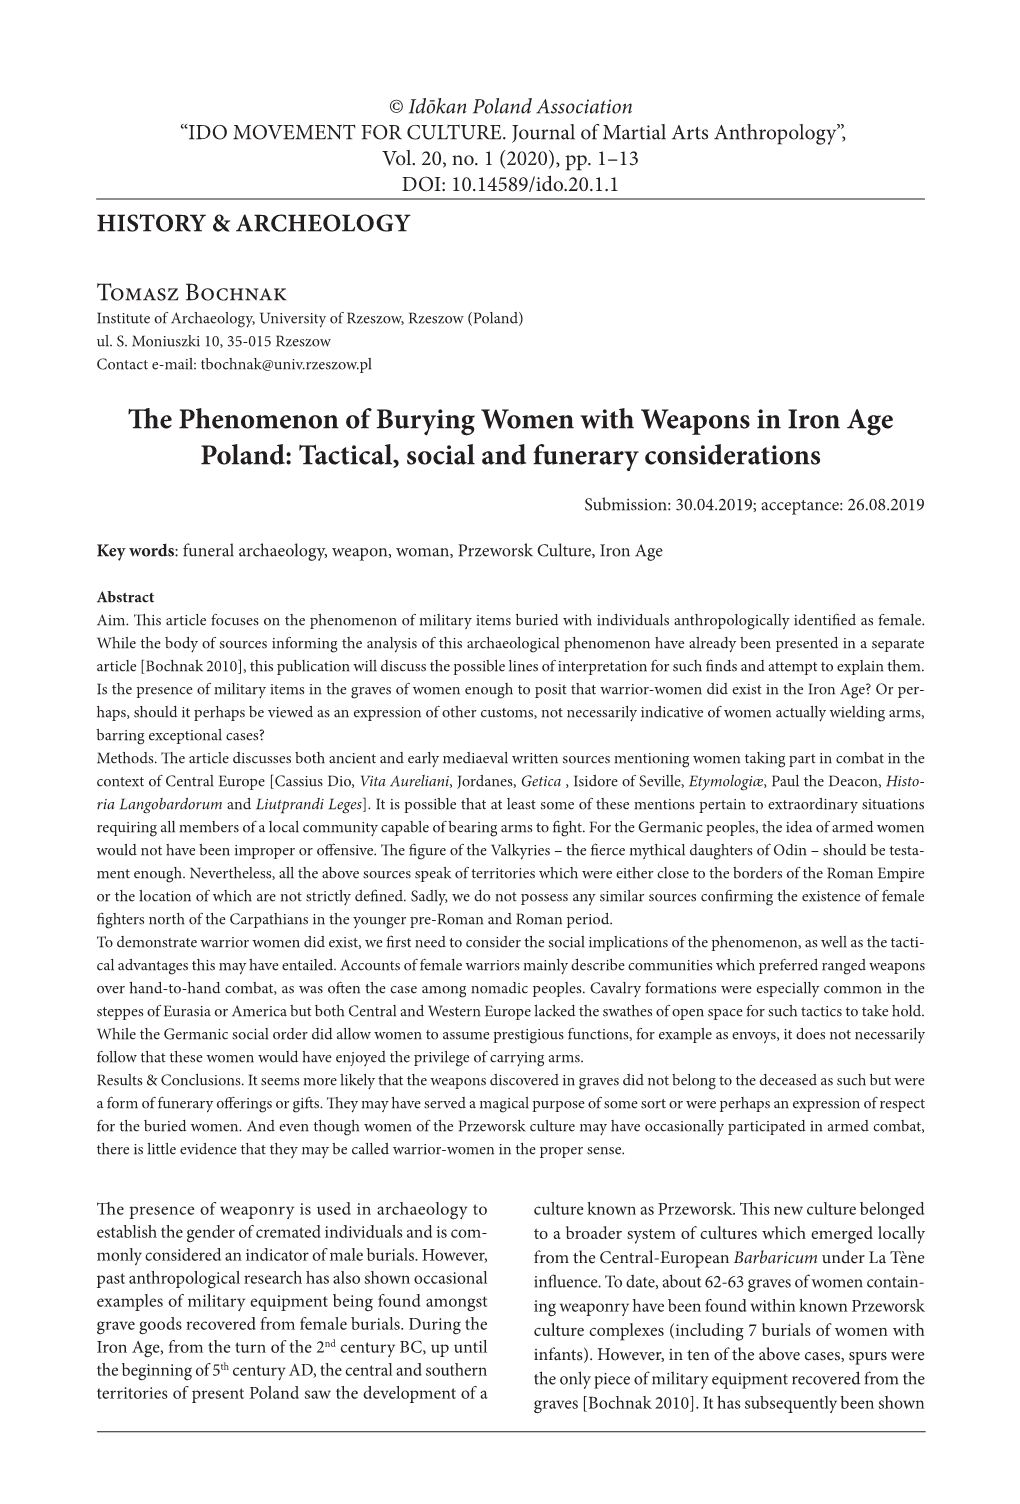 The Phenomenon of Burying Women with Weapons in Iron Age Poland: Tactical, Social and Funerary Considerations